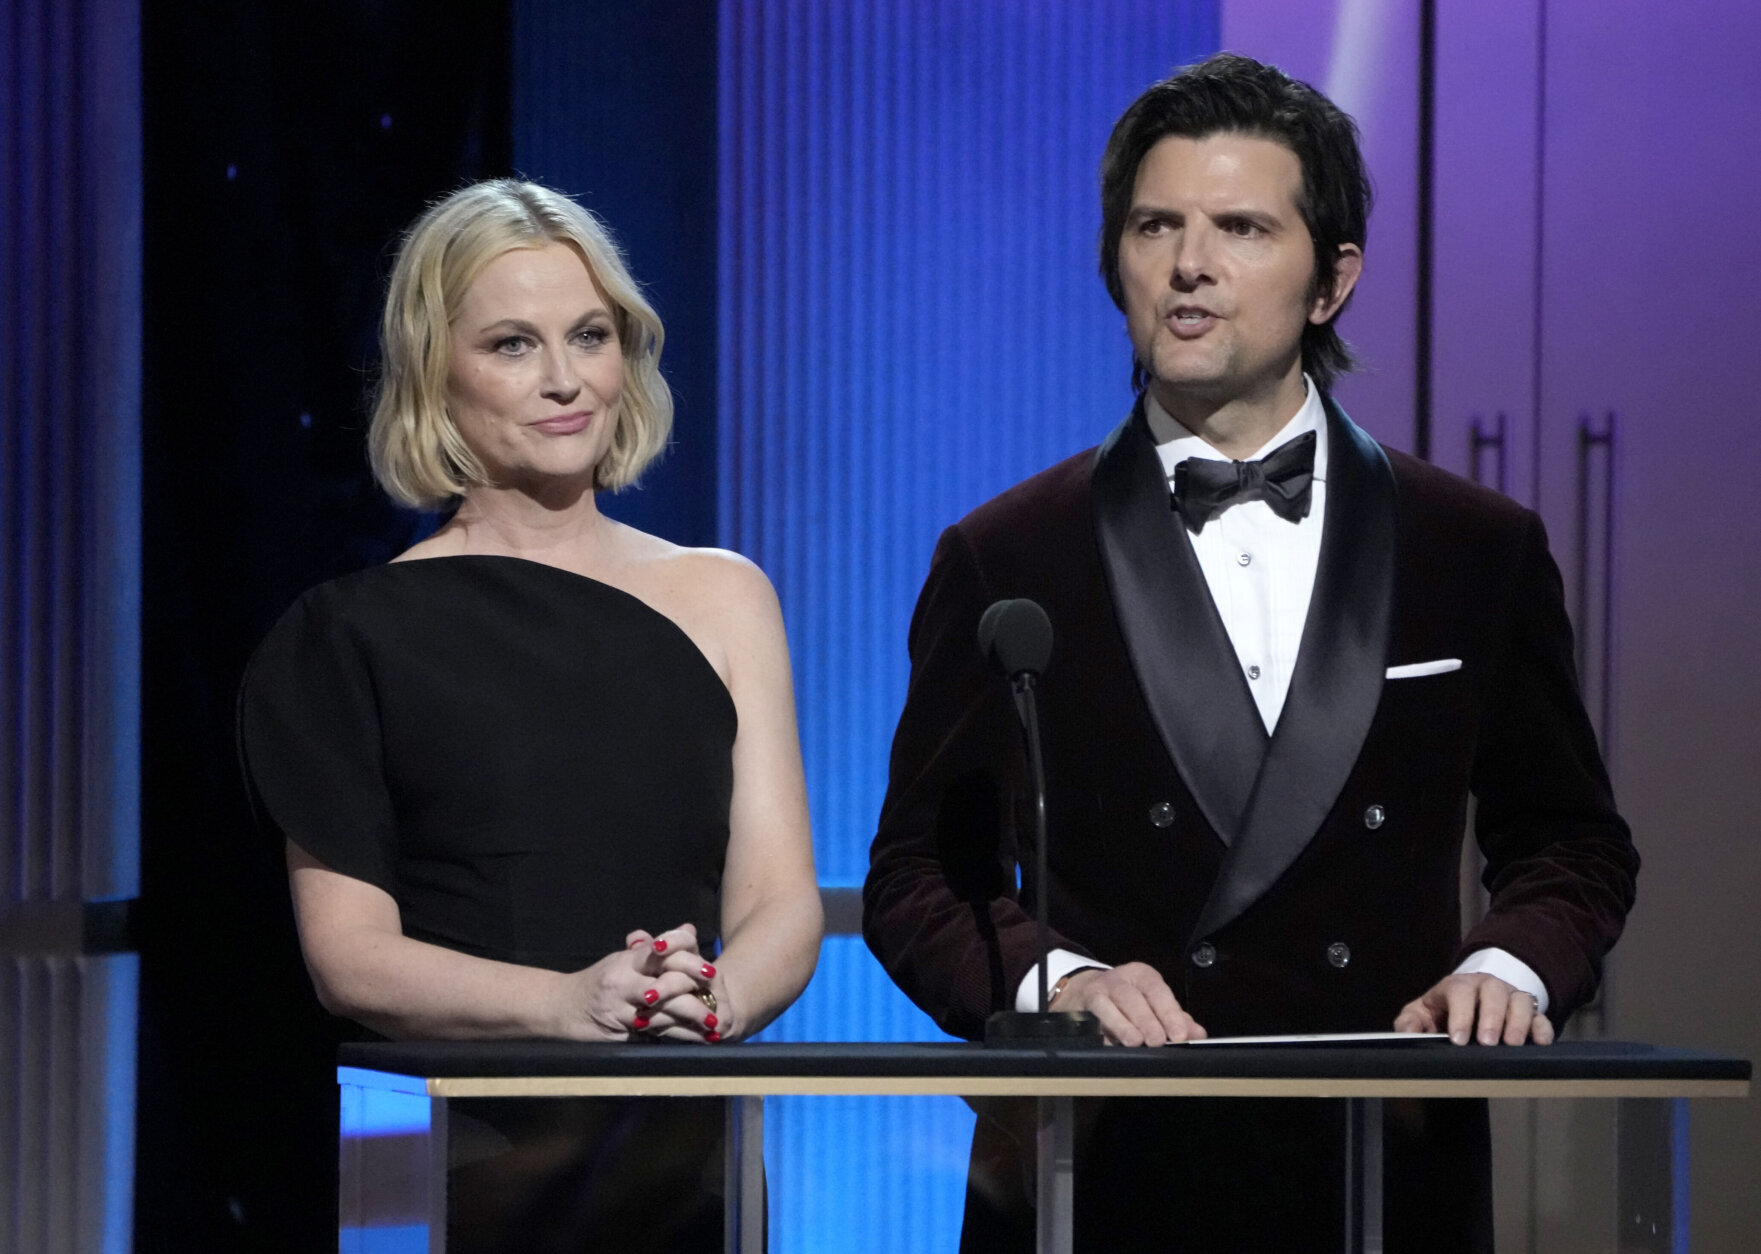 Amy Poehler, left, and Adam Scott present the award for outstanding performance by a female actor in a comedy series at the 29th annual Screen Actors Guild Awards on Sunday, Feb. 26, 2023, at the Fairmont Century Plaza in Los Angeles. (AP Photo/Chris Pizzello)